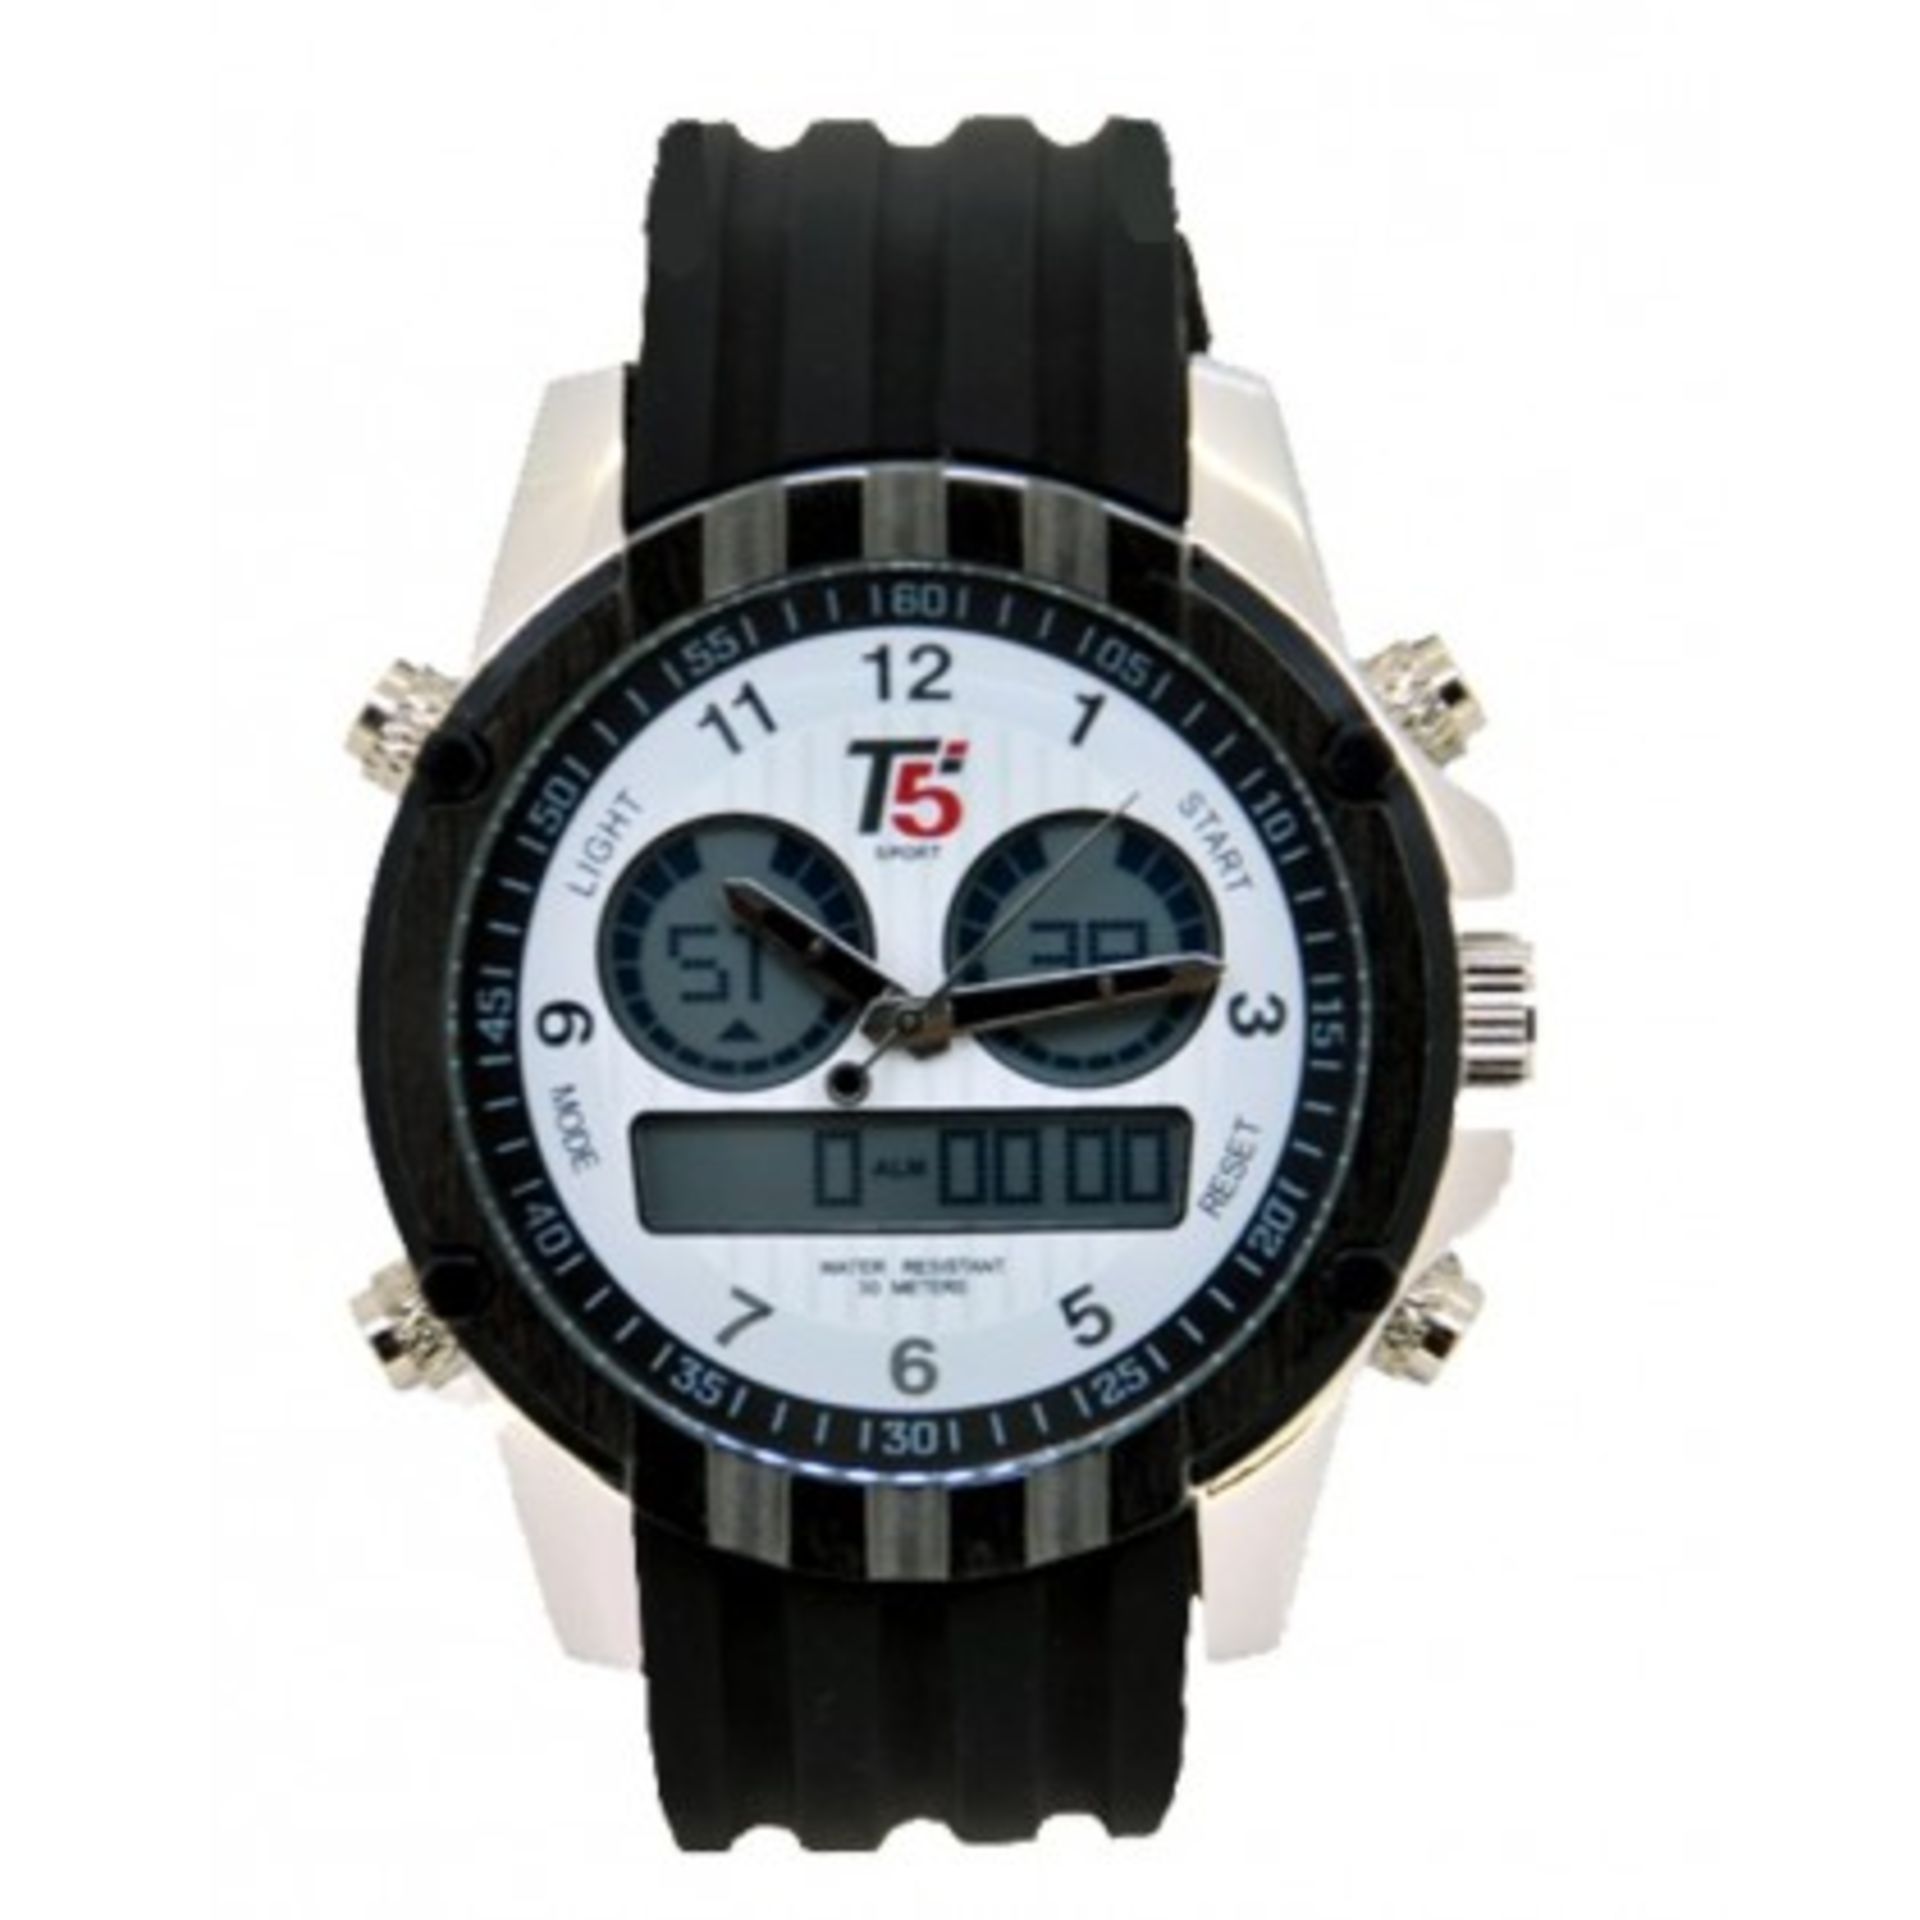 The T5 Astor A3 has a white dial with digital chronograph inner dials. Alarm and date function.